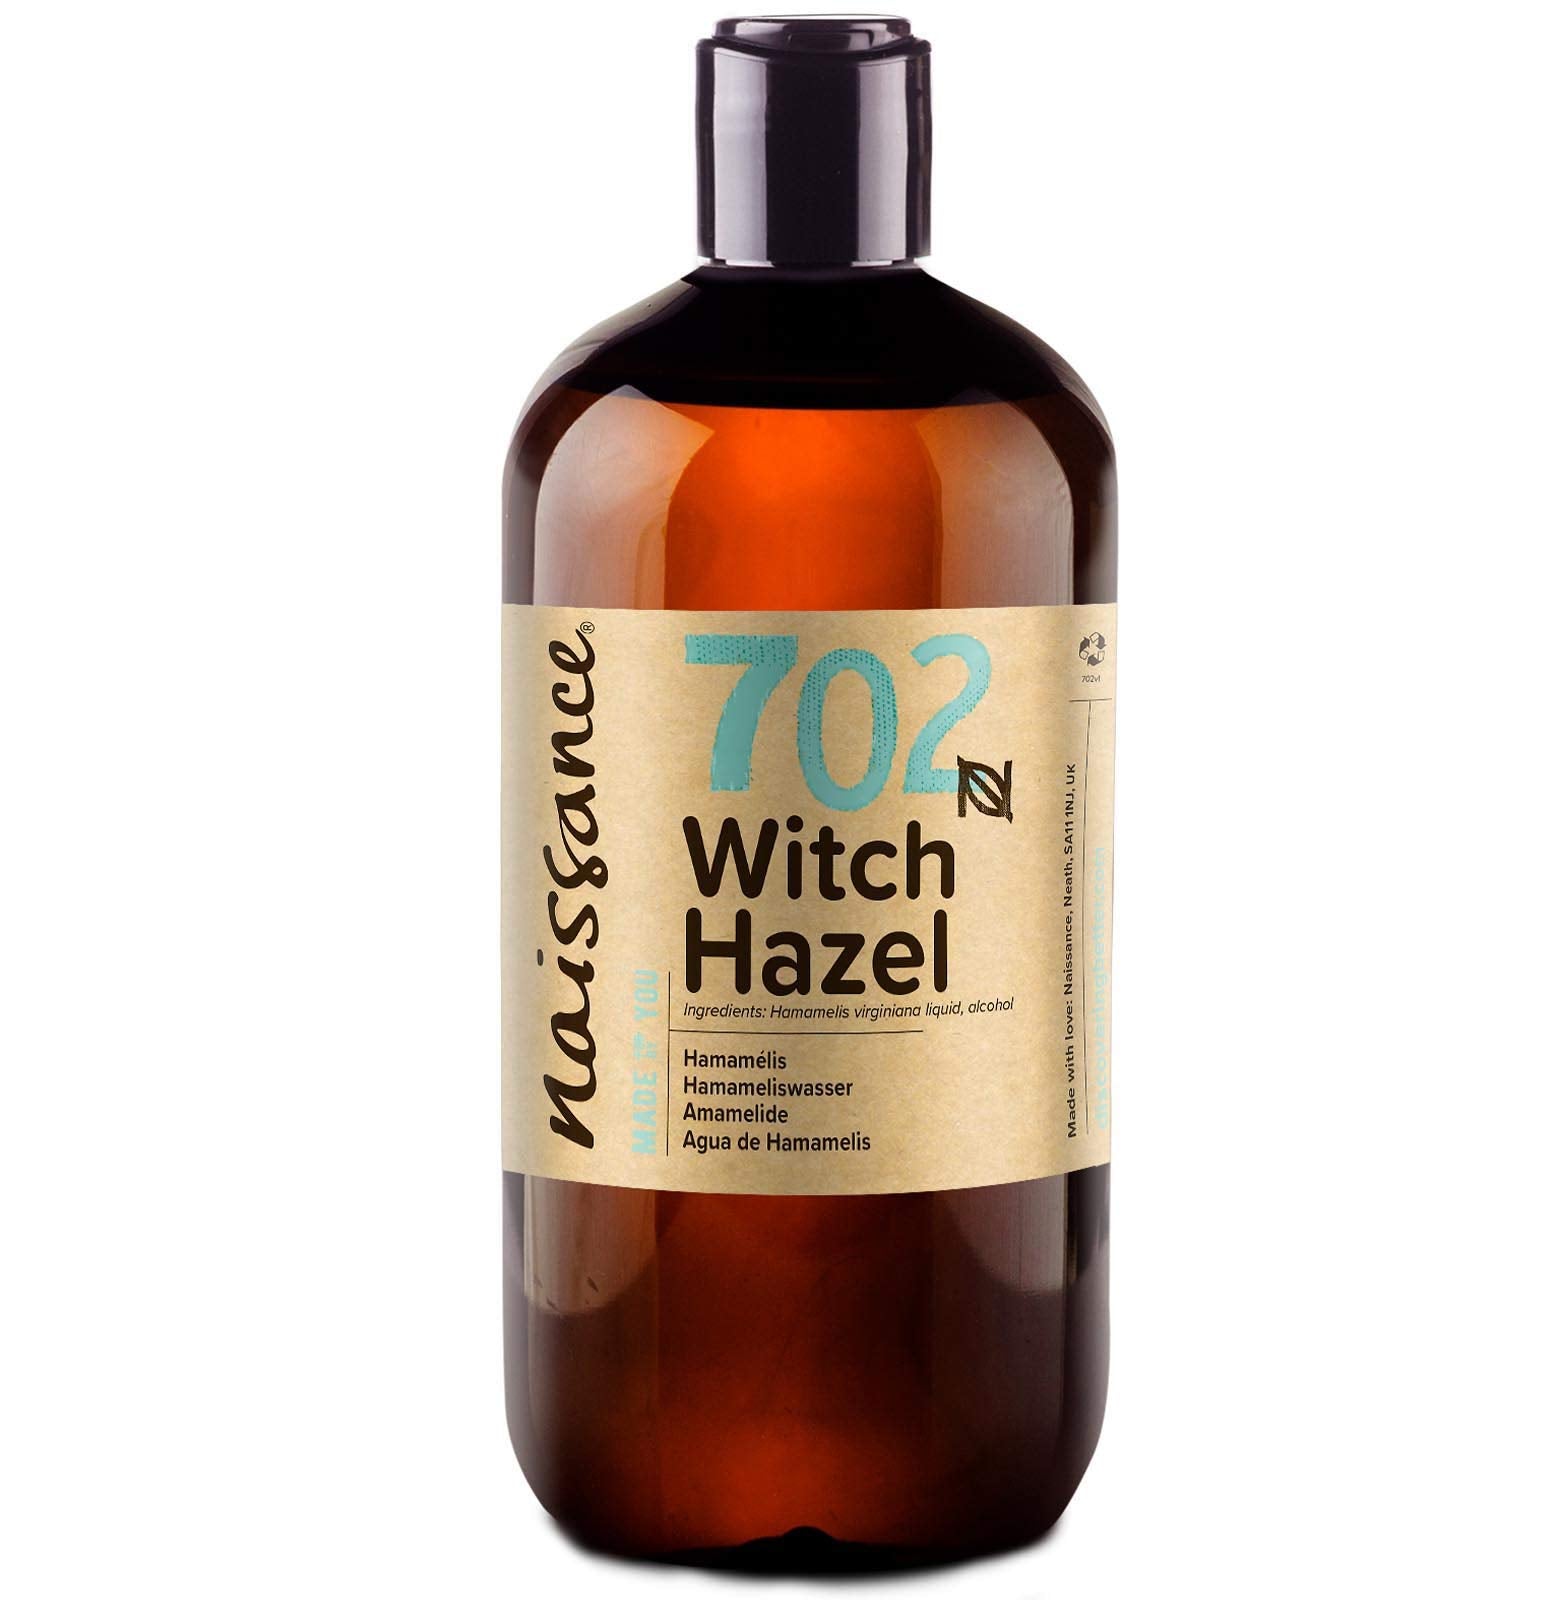 Naissance Distilled Witch Hazel Liquid (no. 702) 500ml - Pure, Natural, Cruelty Free, Vegan - Cleansing & Toning - Ideal for Aromatherapy, Skincare and DIY Beauty Recipes